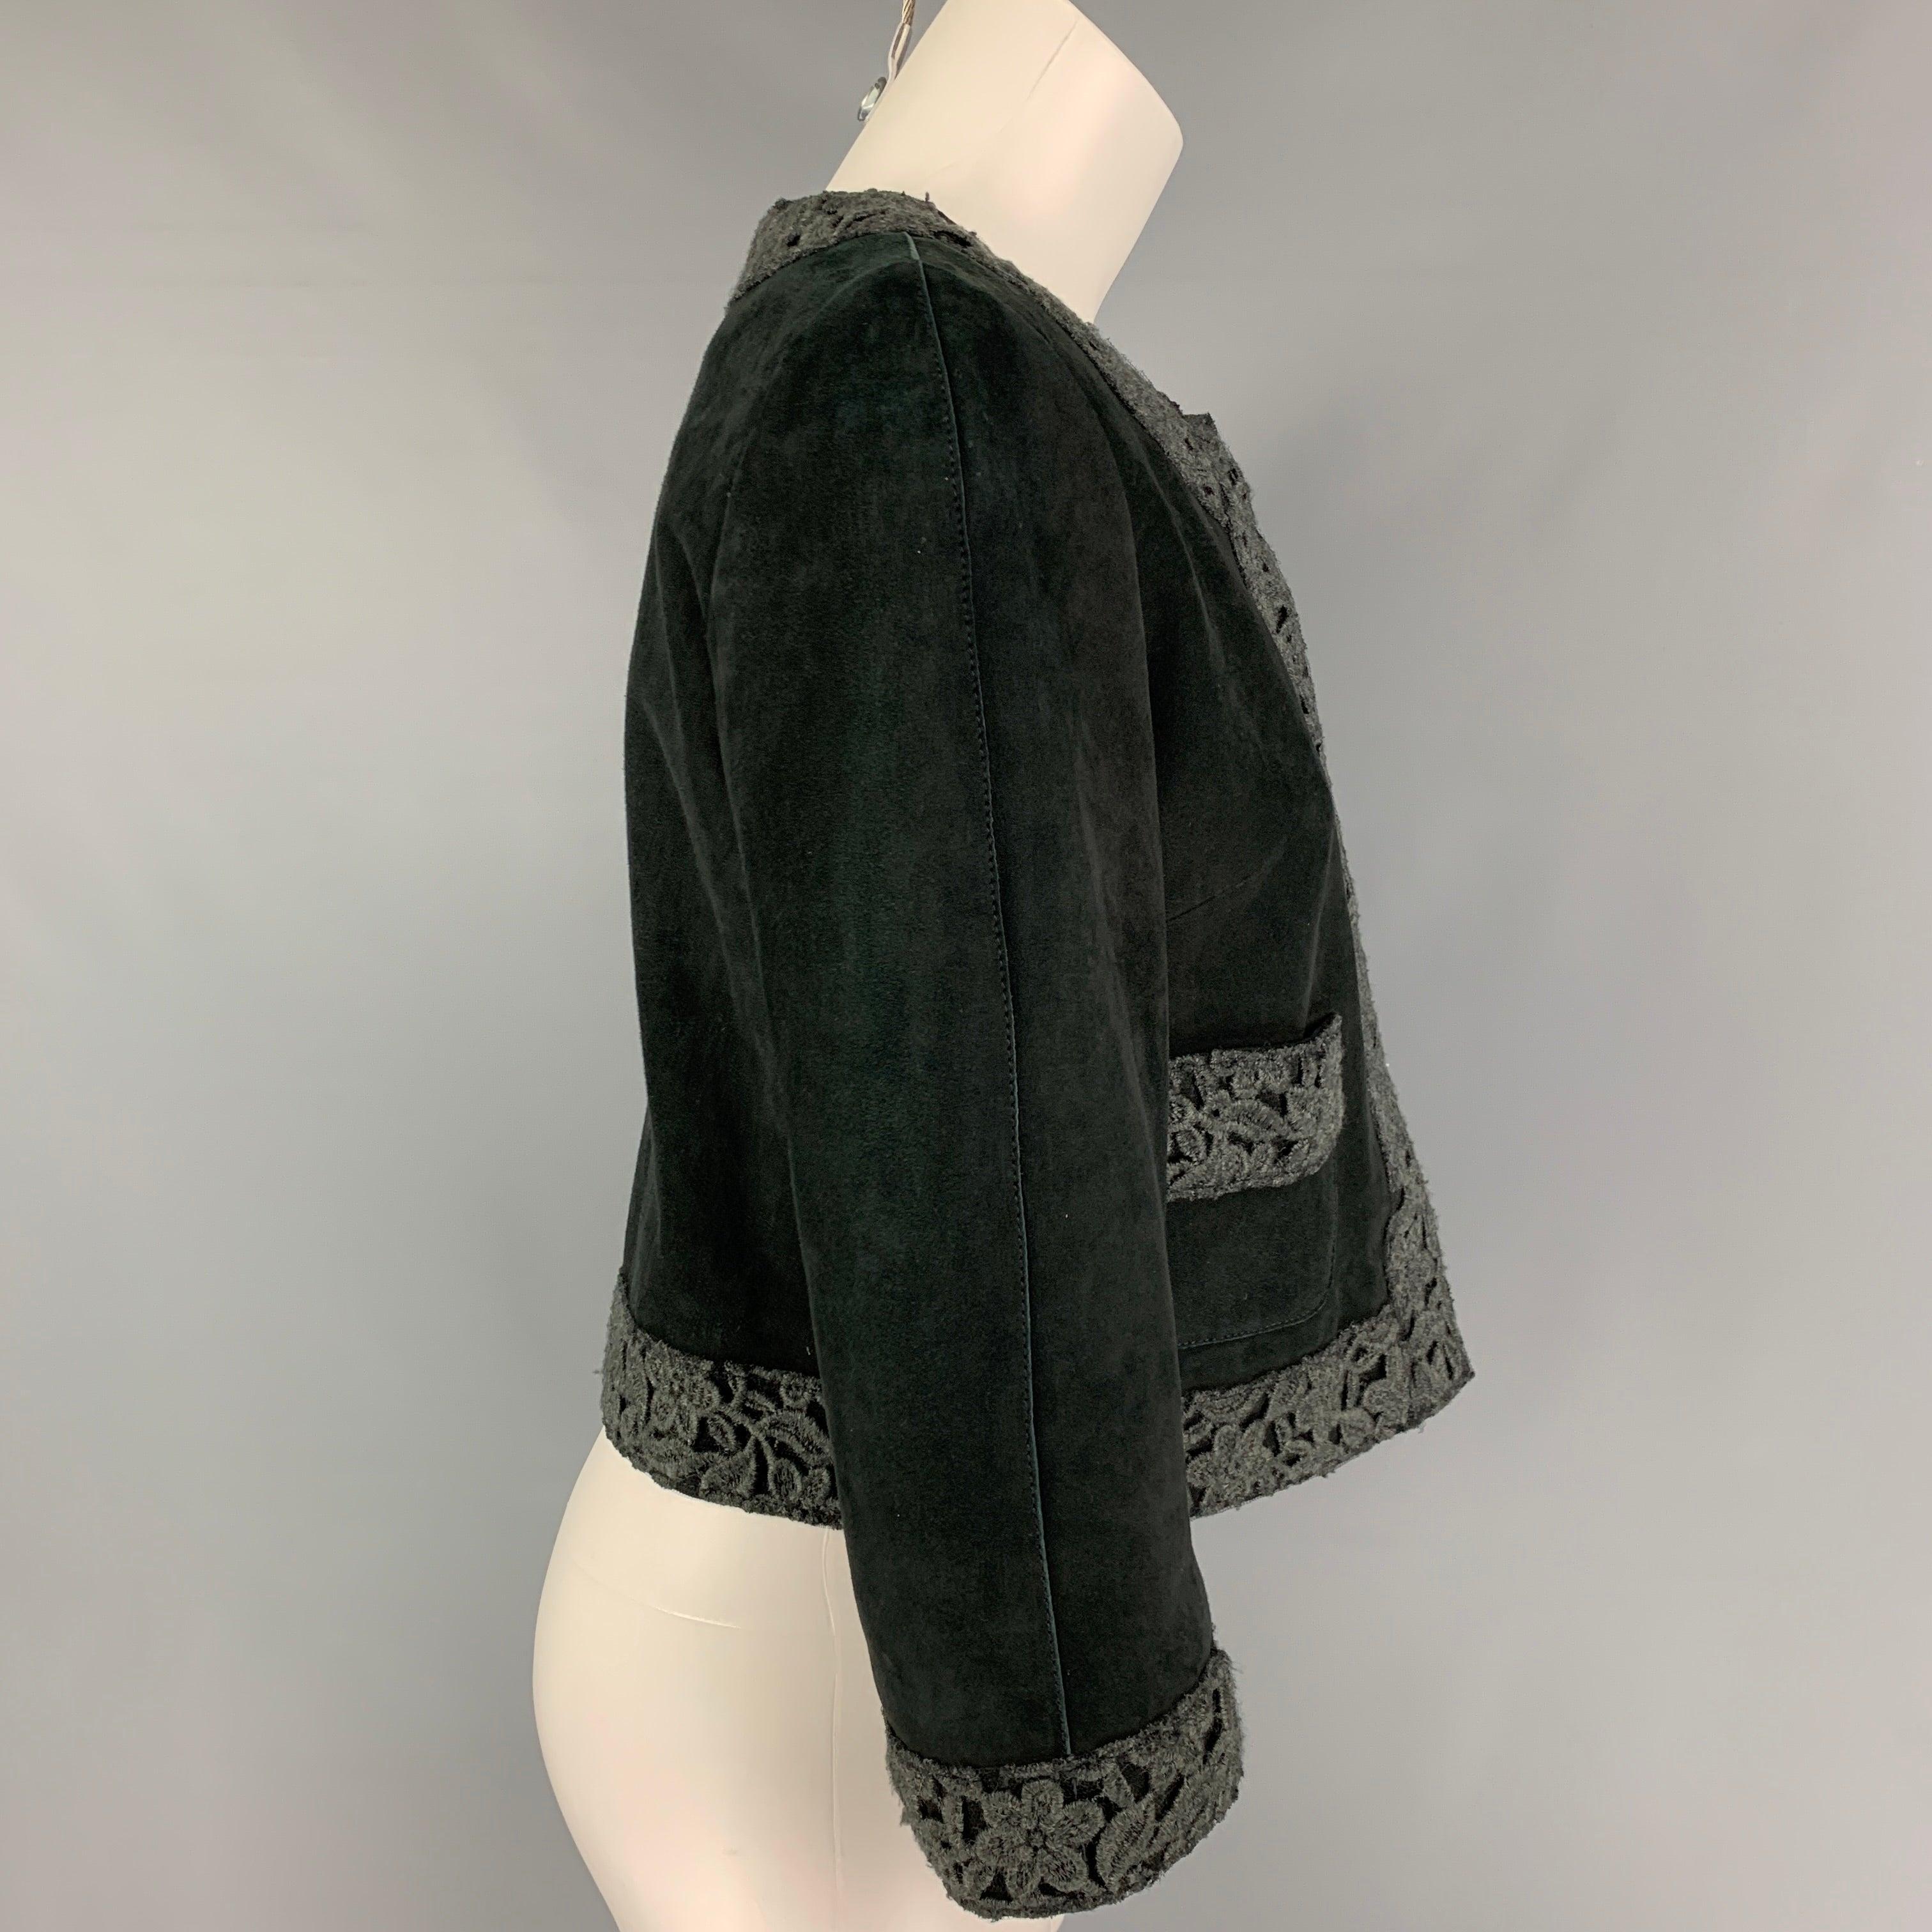 DOLCE & GABBANA jacket comes in a dak green suede featuring a floral embroidered trim, collarless, front pockets, and a snap button closure. Made in Italy.
Very Good
Pre-Owned Condition. 

Marked:   44 

Measurements: 
 
Shoulder: 14.5 inches  Bust: